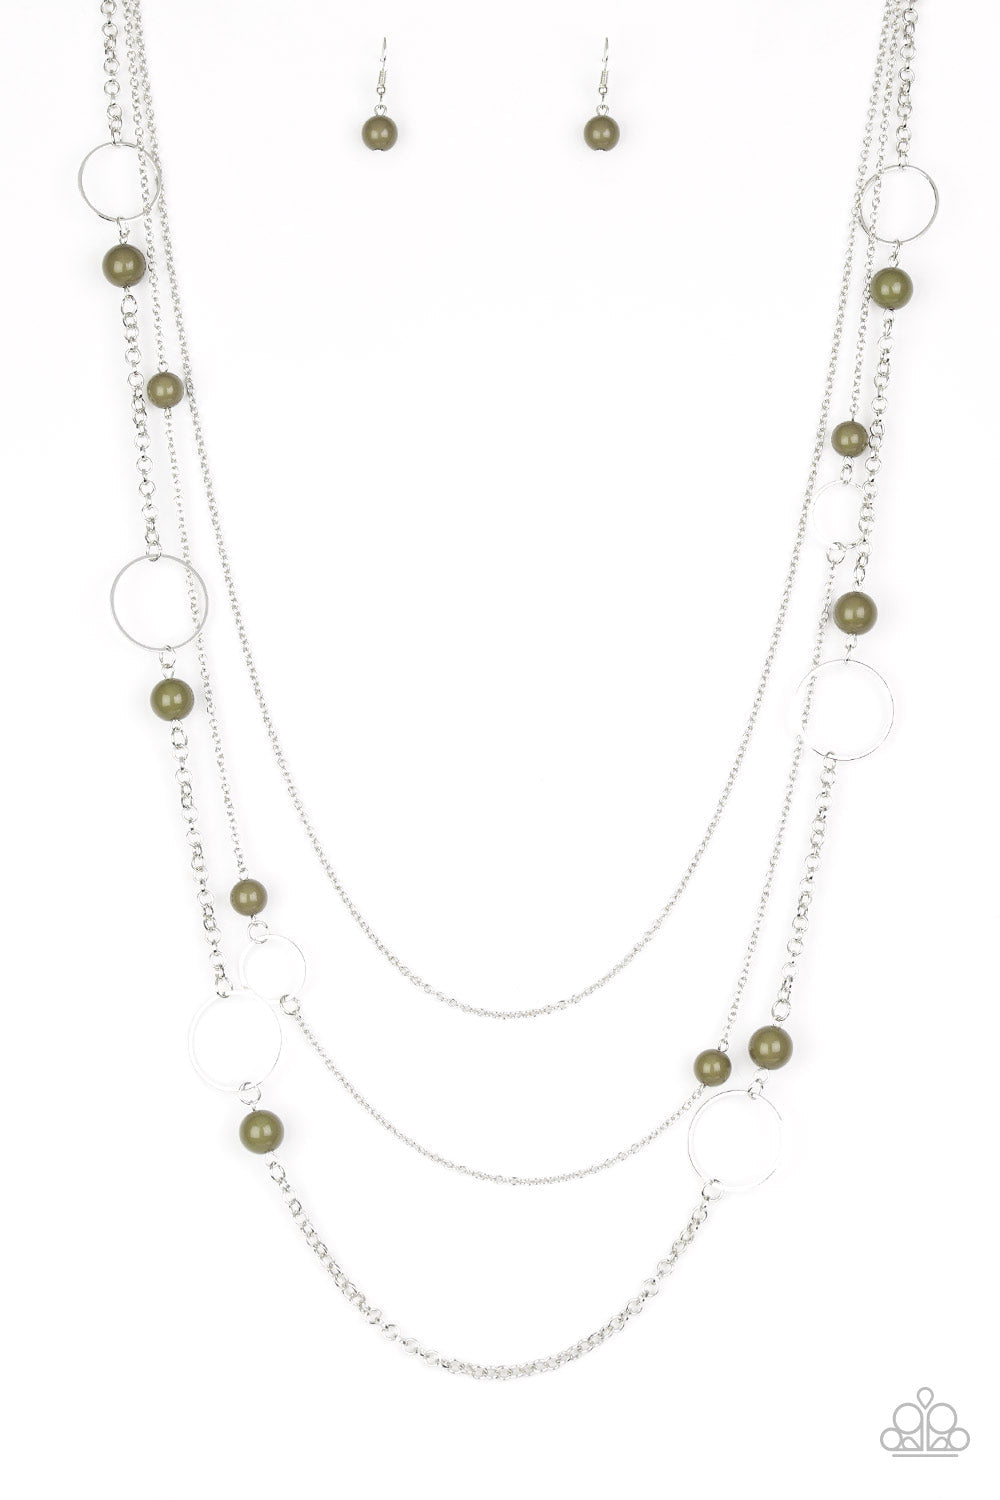 Beachside Babe - Green and Silver Fashion Necklace - Paparazzi Accessories - Featuring earthy green beads and shimmery silver hoops, mismatched silver chains layer down the chest for a seasonal look. Features an adjustable clasp closure. Sold as one individual necklace.